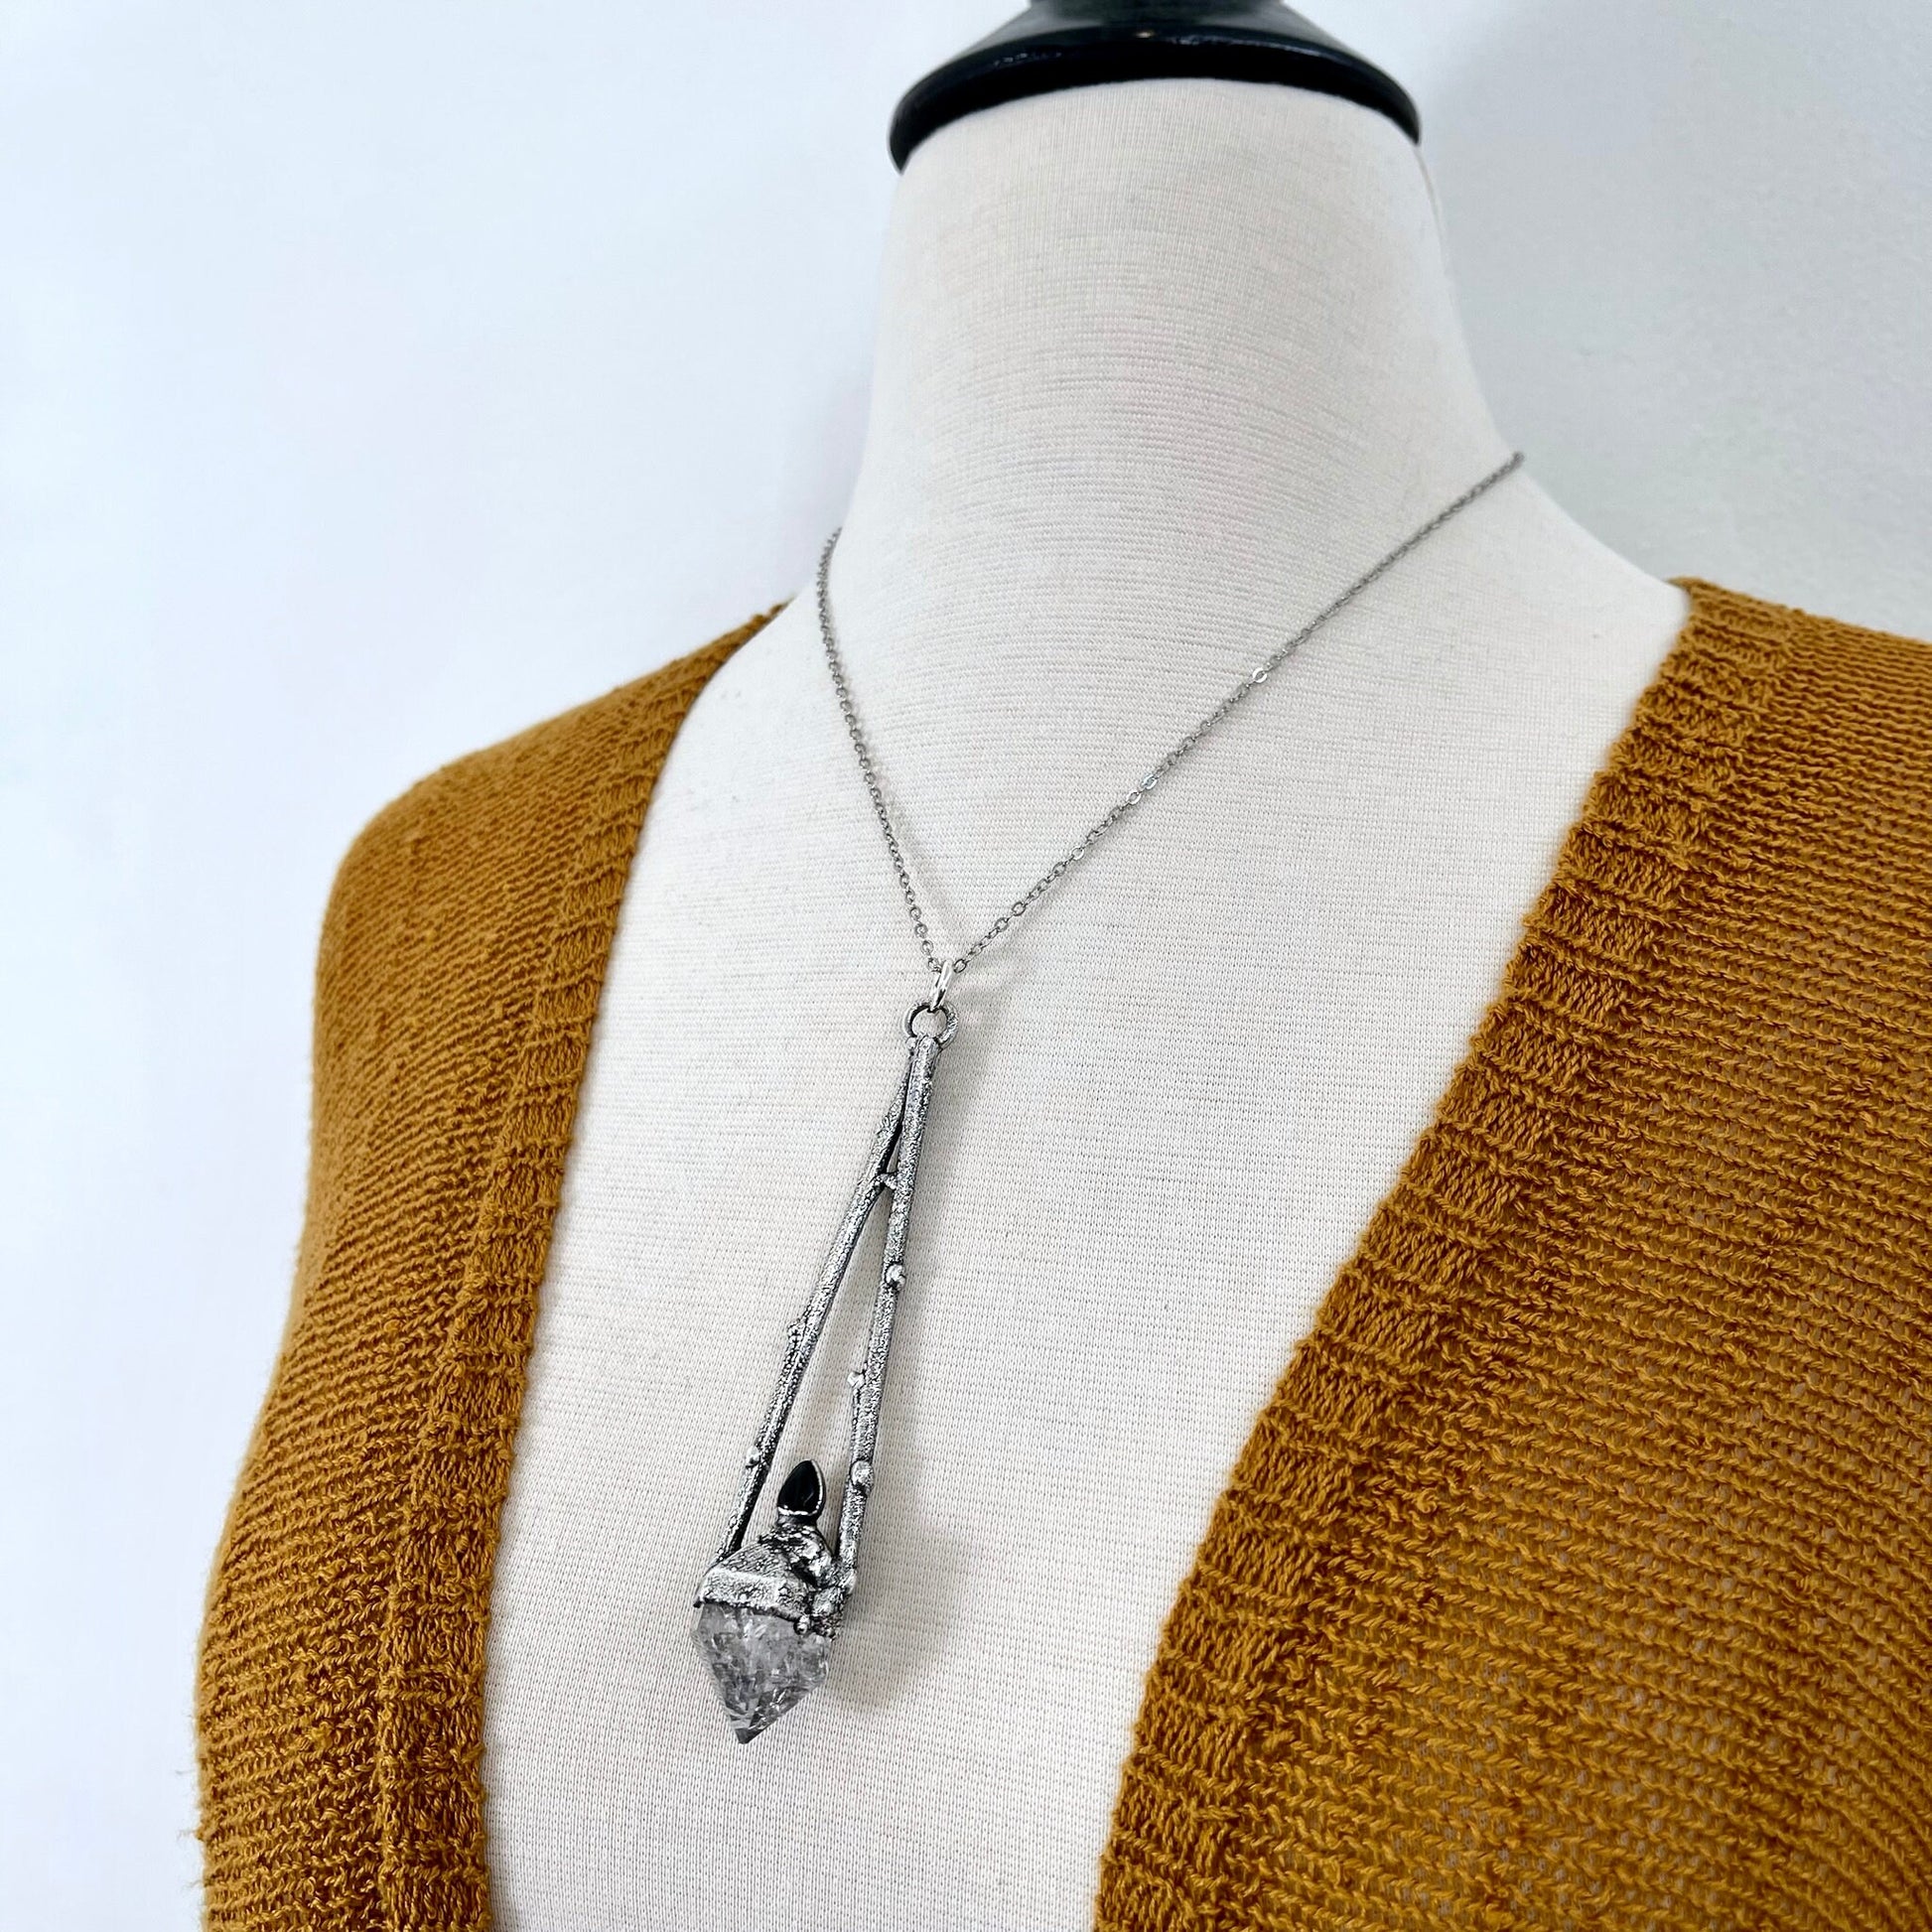 big crystal Necklace, Big Gothic Necklace, Bohemian Jewelry, Clear Quartz Pendent, Crystal Necklaces, Crystal Pendant, Etsy ID: 1650759626, FOXLARK- NECKLACES, Jewelry, nature inspired, Necklaces, Silver Jewelry, Silver Necklace, Silver Stone Jewelry, Sta